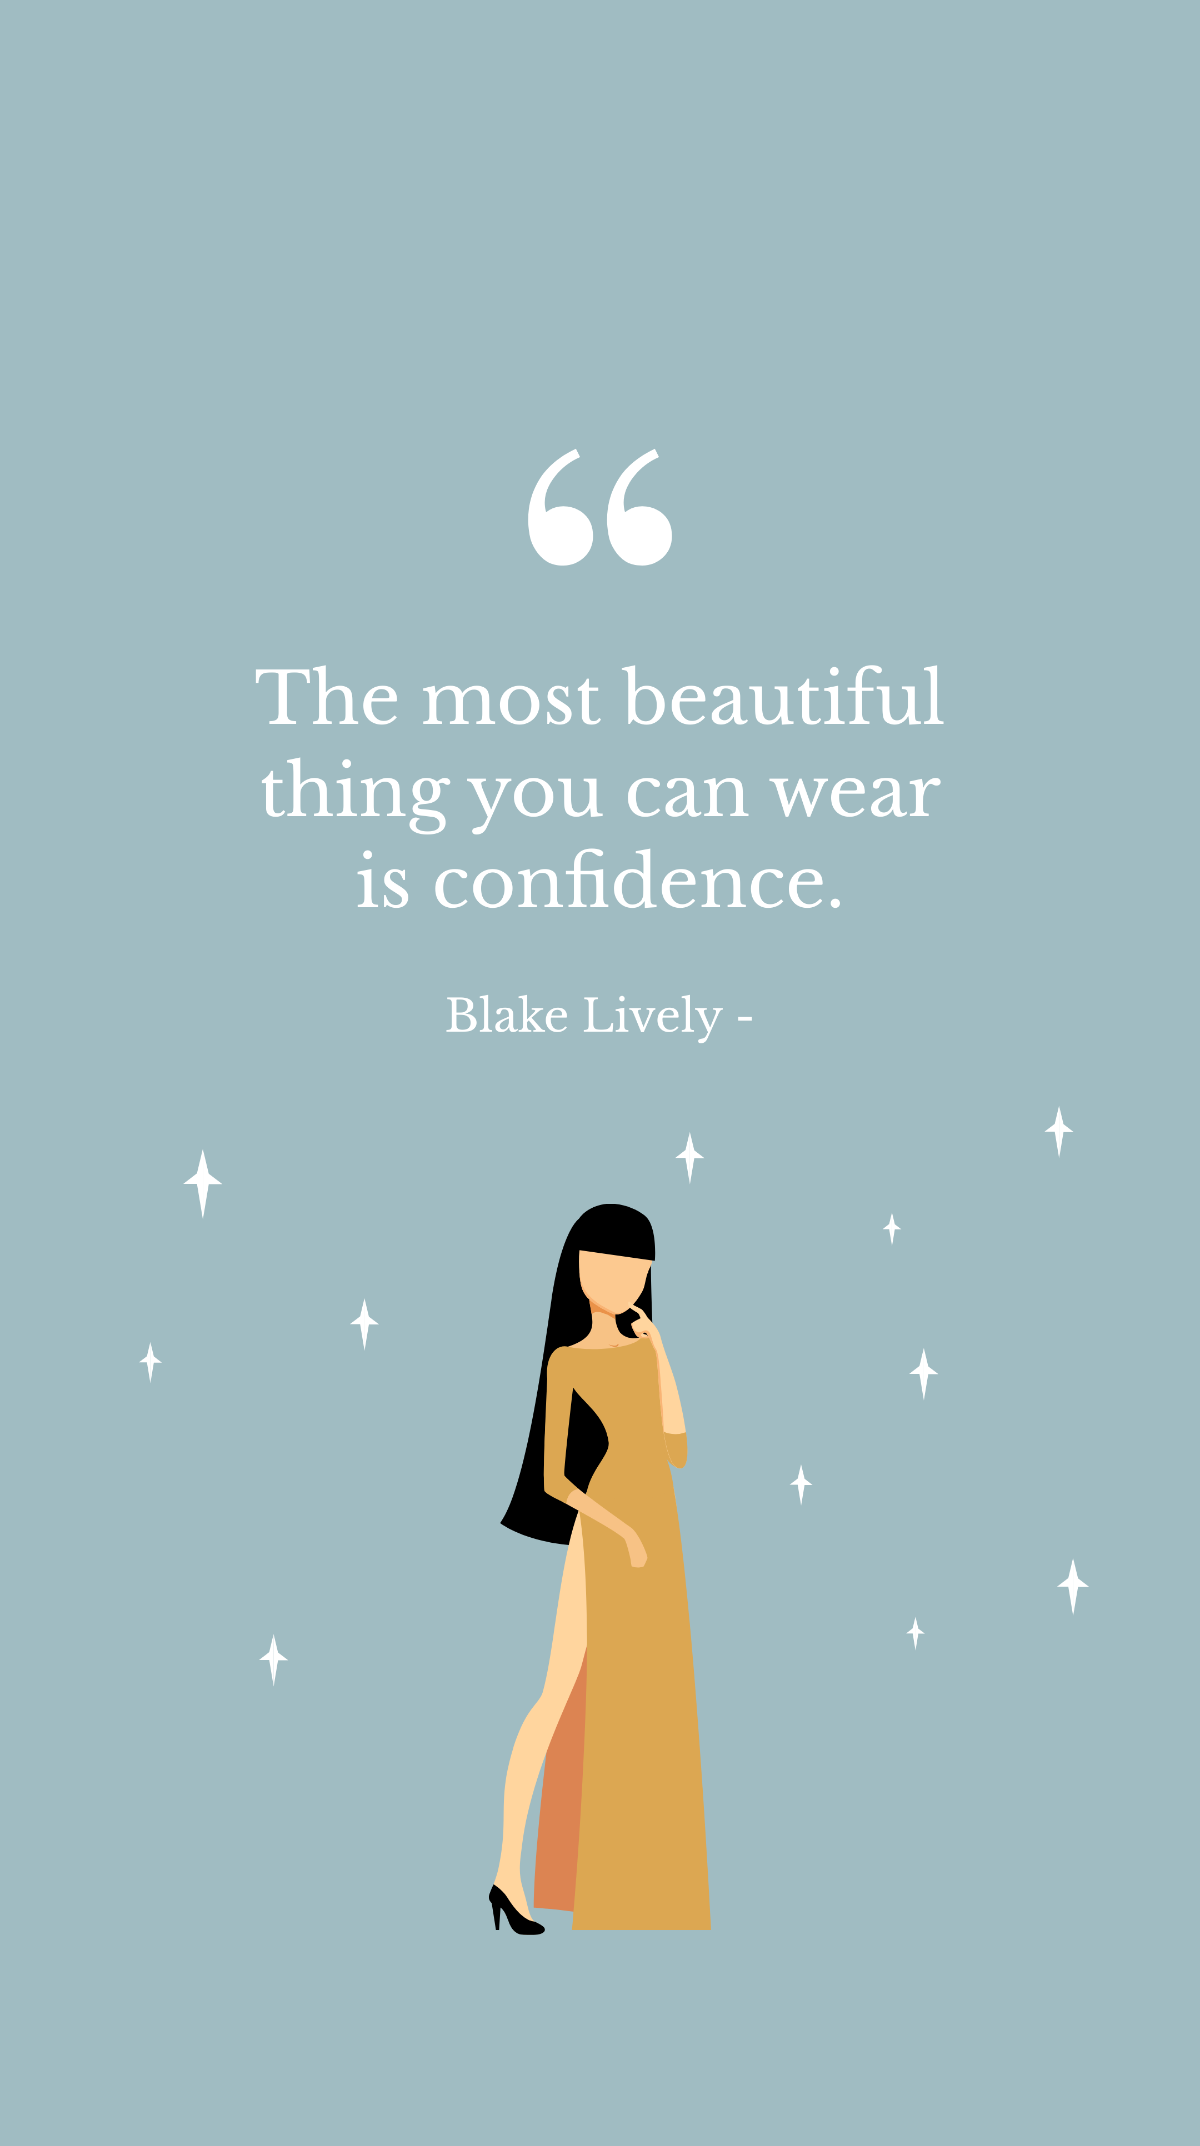 Blake Lively - The most beautiful thing you can wear is confidence.